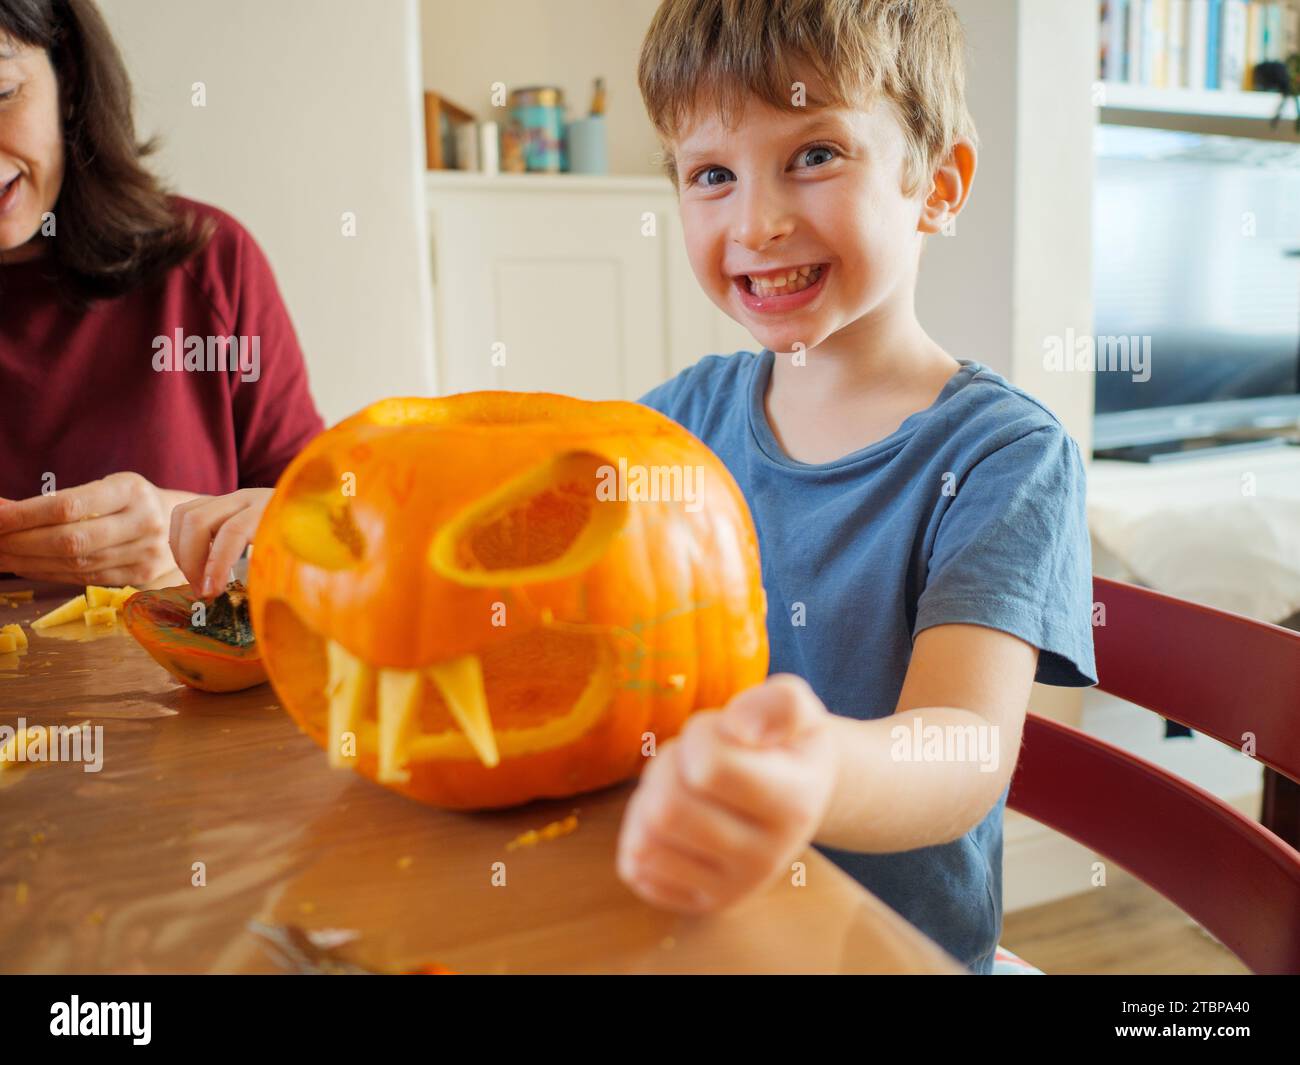 Smiling happy young child having fun making scary face pumpkin to celebrate halloween at home, UK Stock Photo